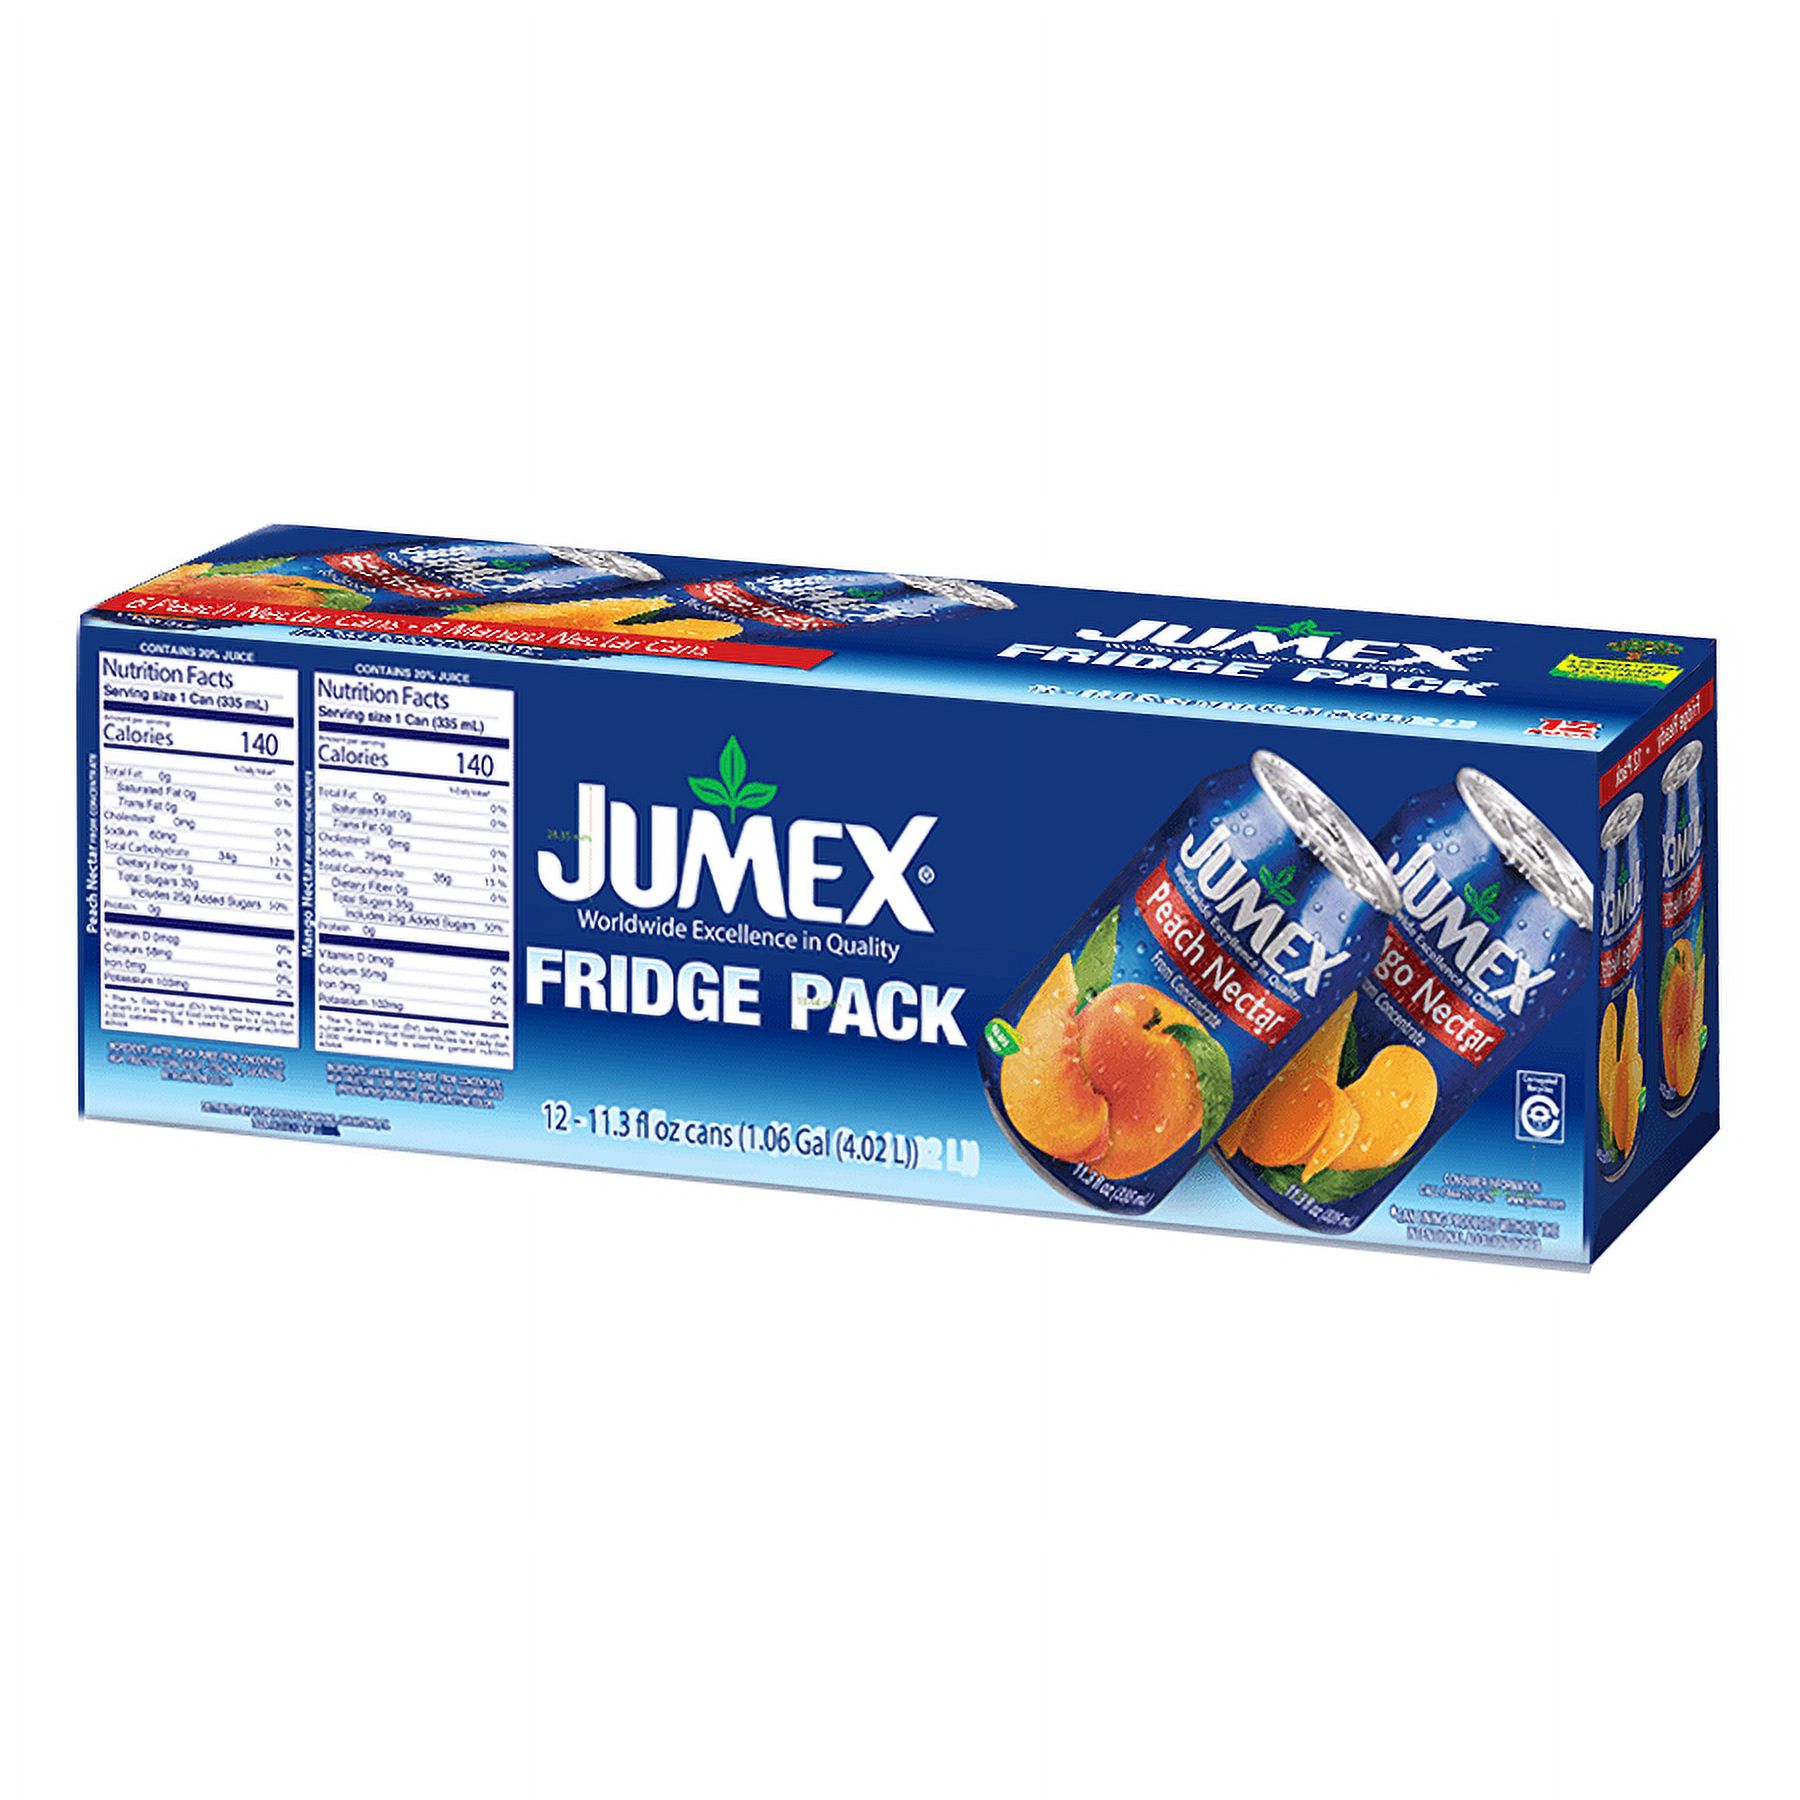 Jumex Mango and Peach Nectar from Concentrate, 11.3 Fl. Oz., 12 Count - image 3 of 5